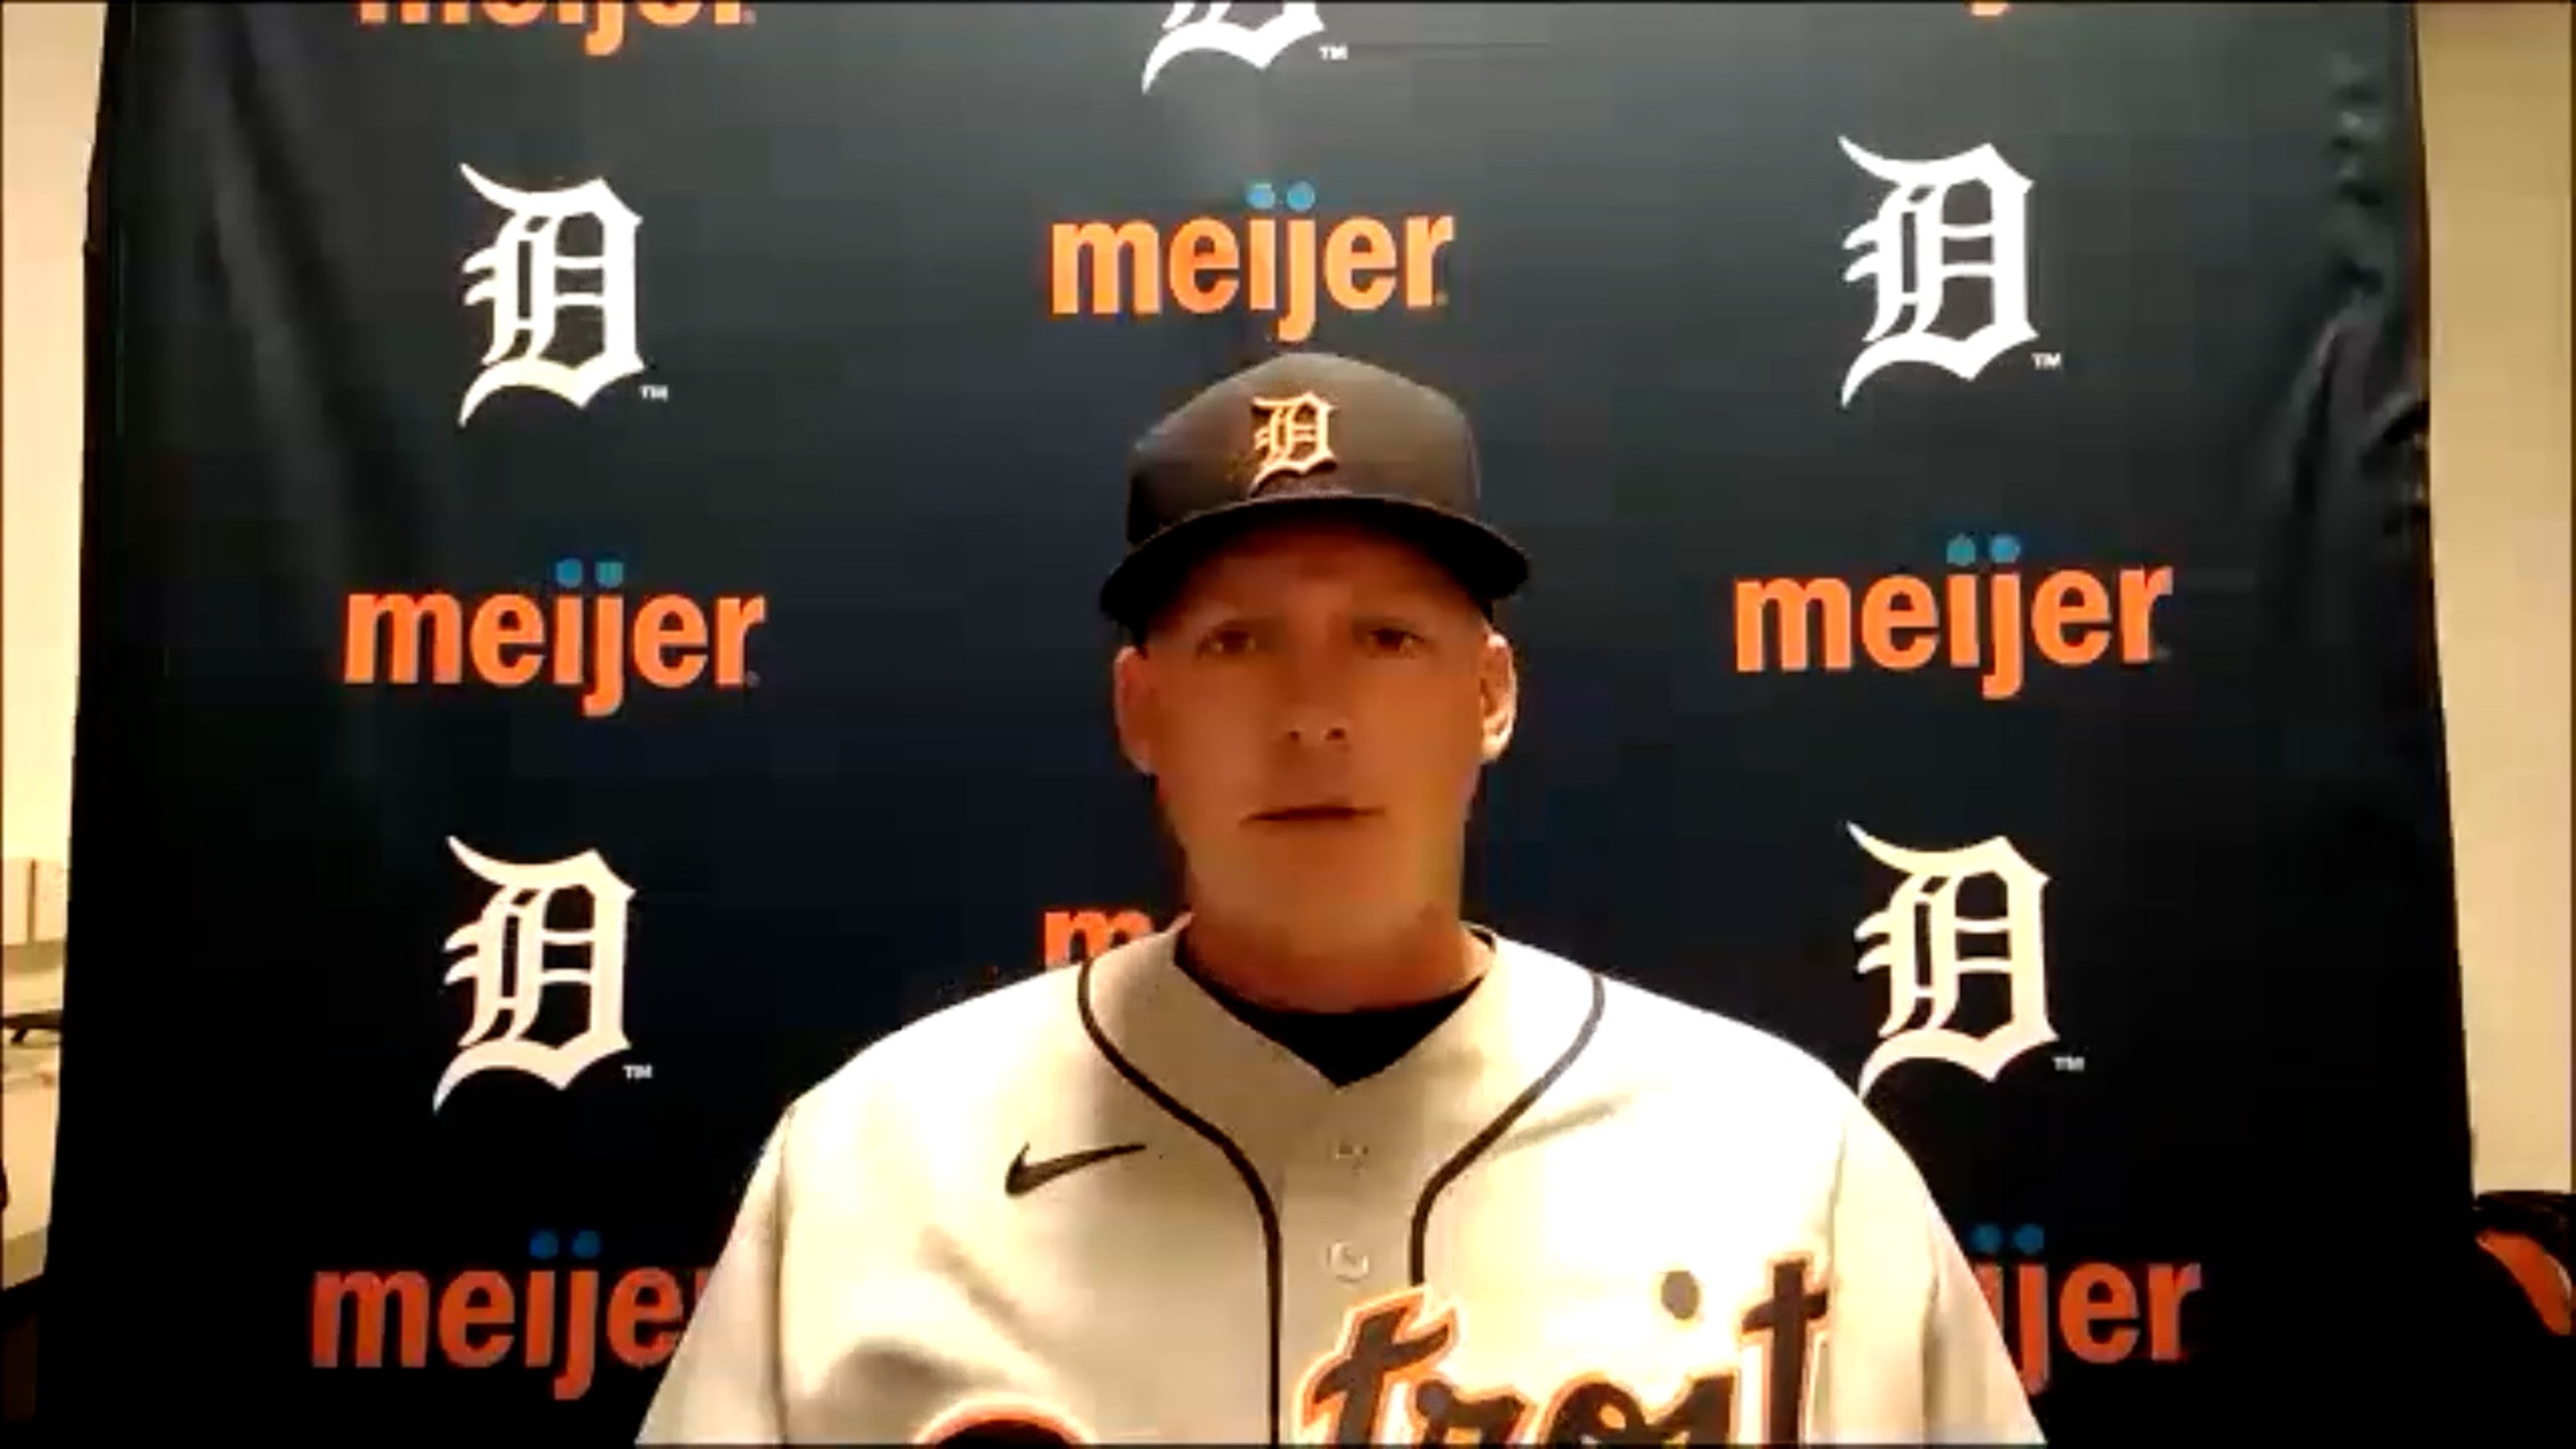 A.J. Hinch returns to Houston as Tigers manager